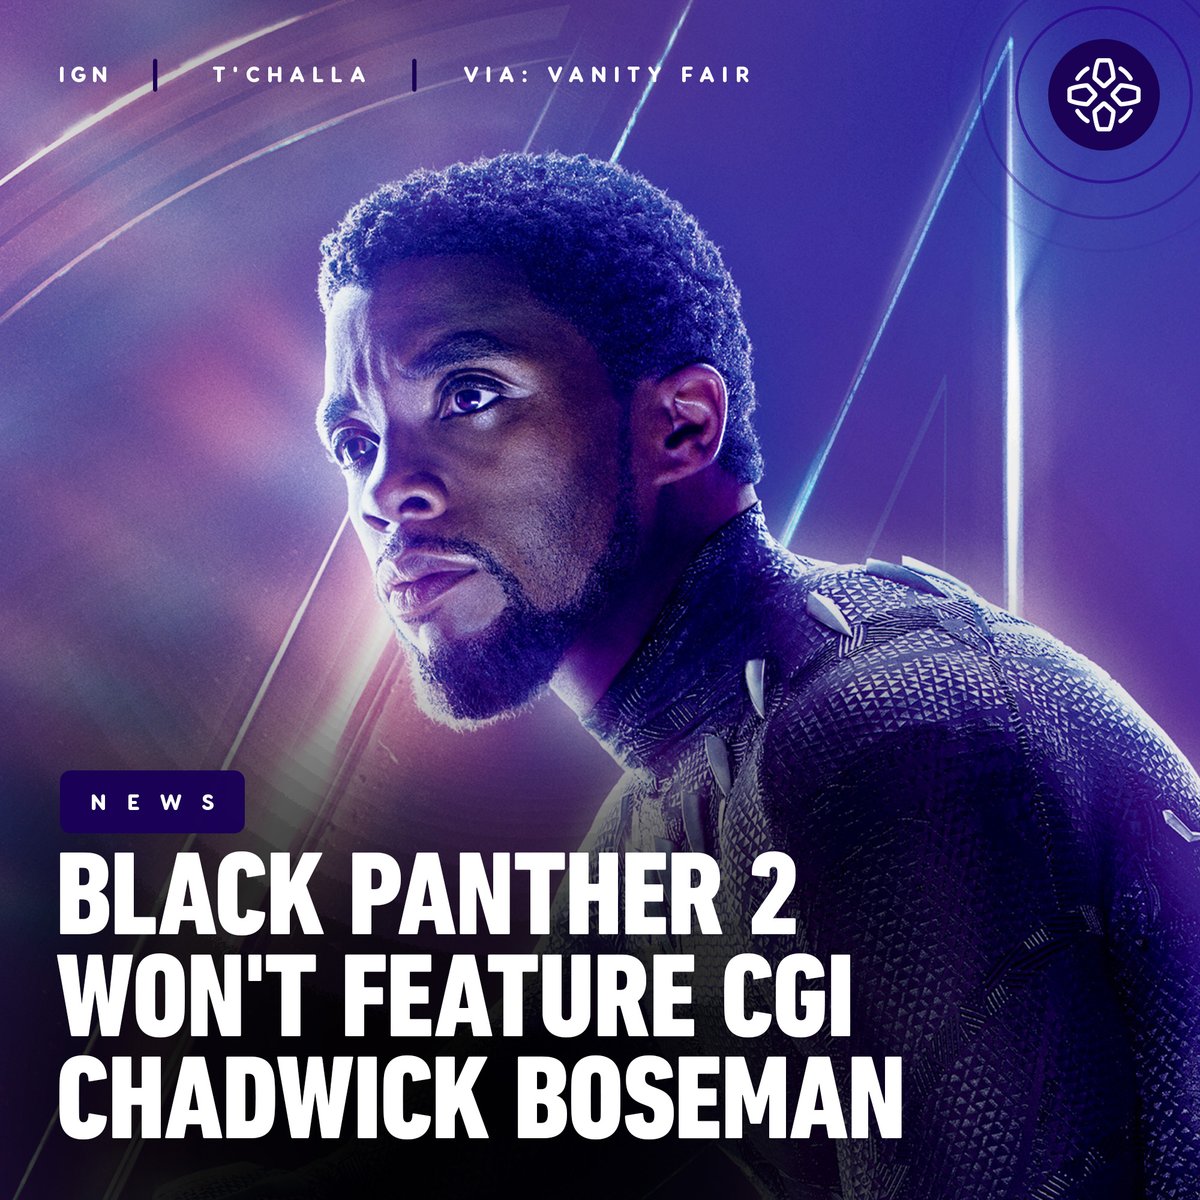 RT @IGN: Black Panther 2 won't feature a CGI version of Chadwick Boseman, according to Marvel producer Nate Moore. https://t.co/Tnn1ZeqDOx